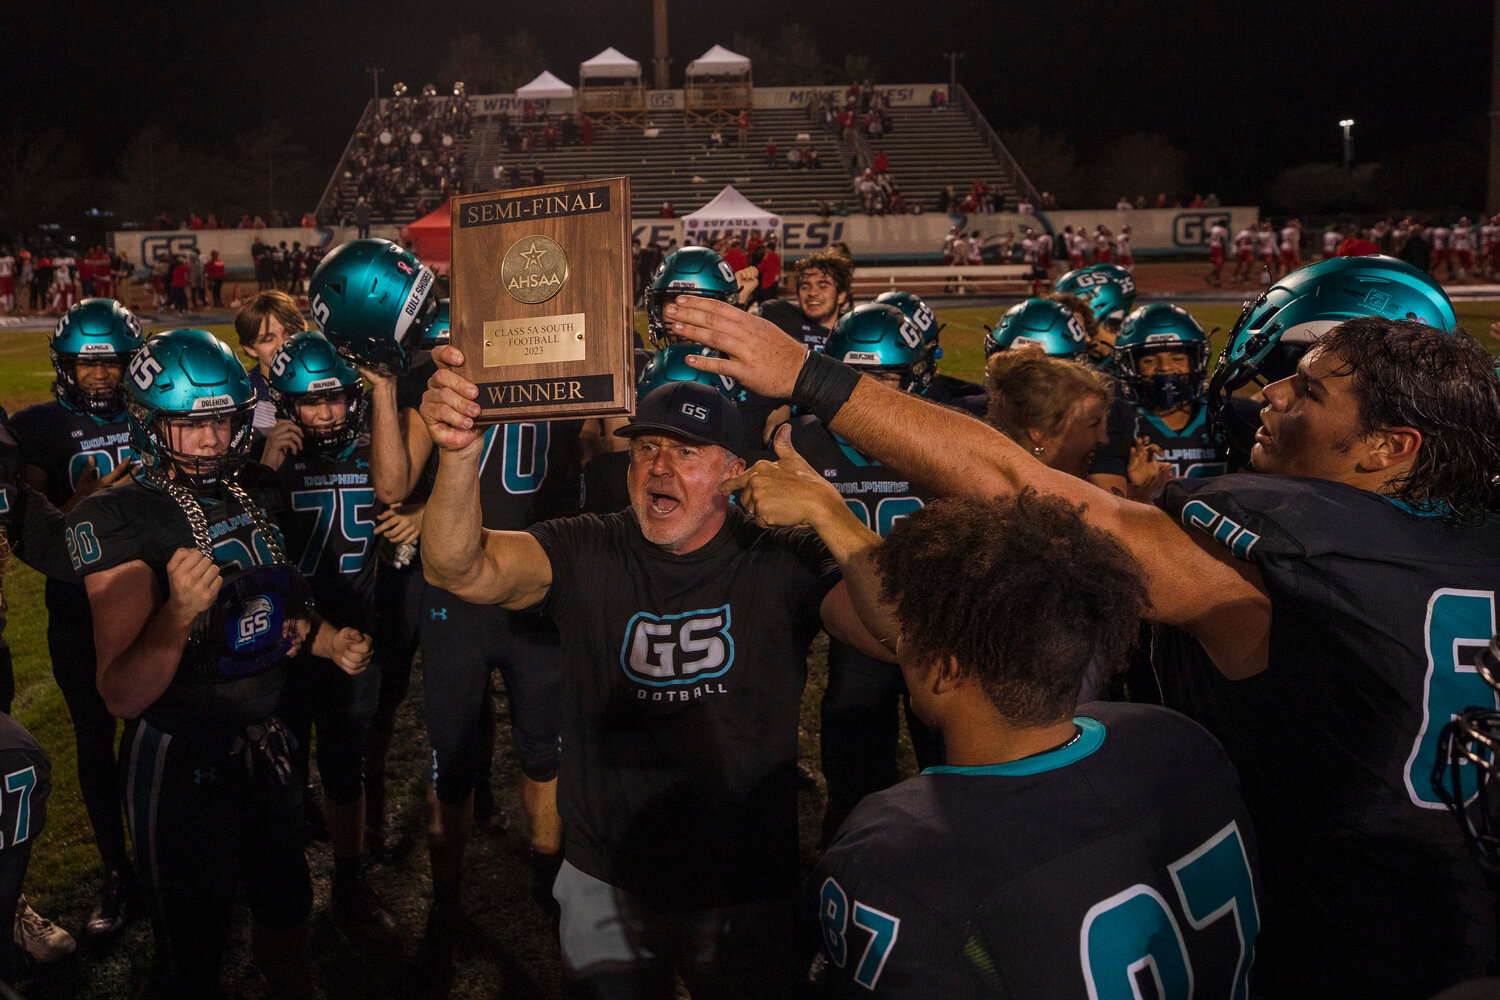 The Class 5A semifinal plaque stayed in Gulf Shores after the Dolphins’ 45-0 win over the Eufaula Tigers Friday night to punch a ticket to the state finals on Thursday in Tuscaloosa. Gulf Shores recorded its fifth shutout victory, and third of the postseason, to remain undefeated at 14-0.